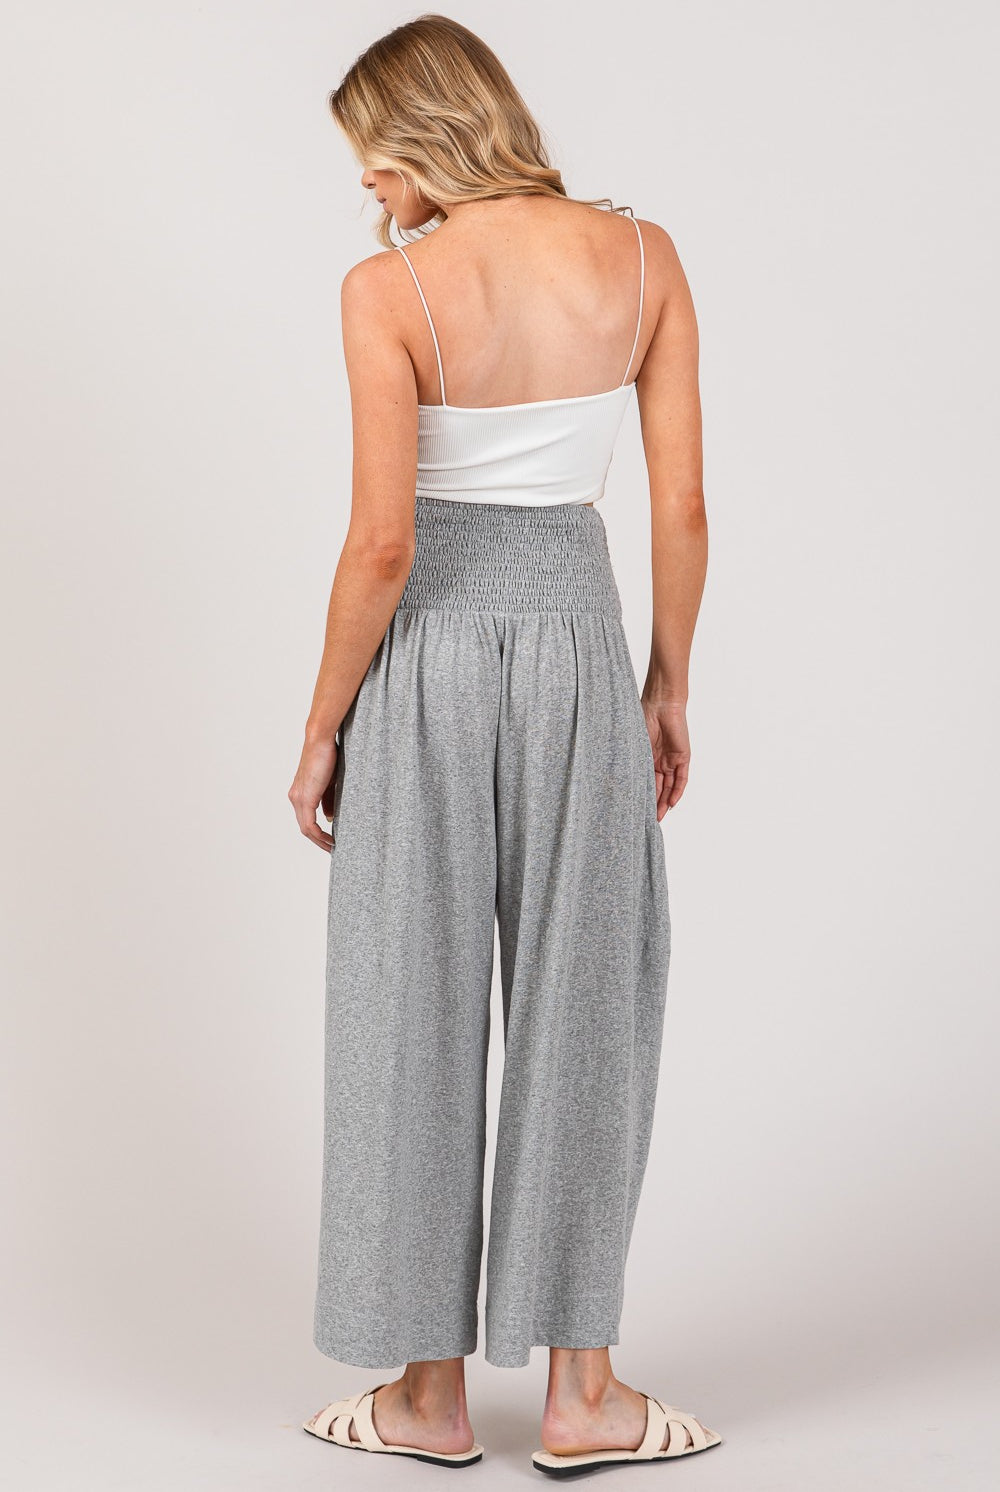 Woman wearing stylish gray high waist smocked drawstring pants, perfect for chic outfits.